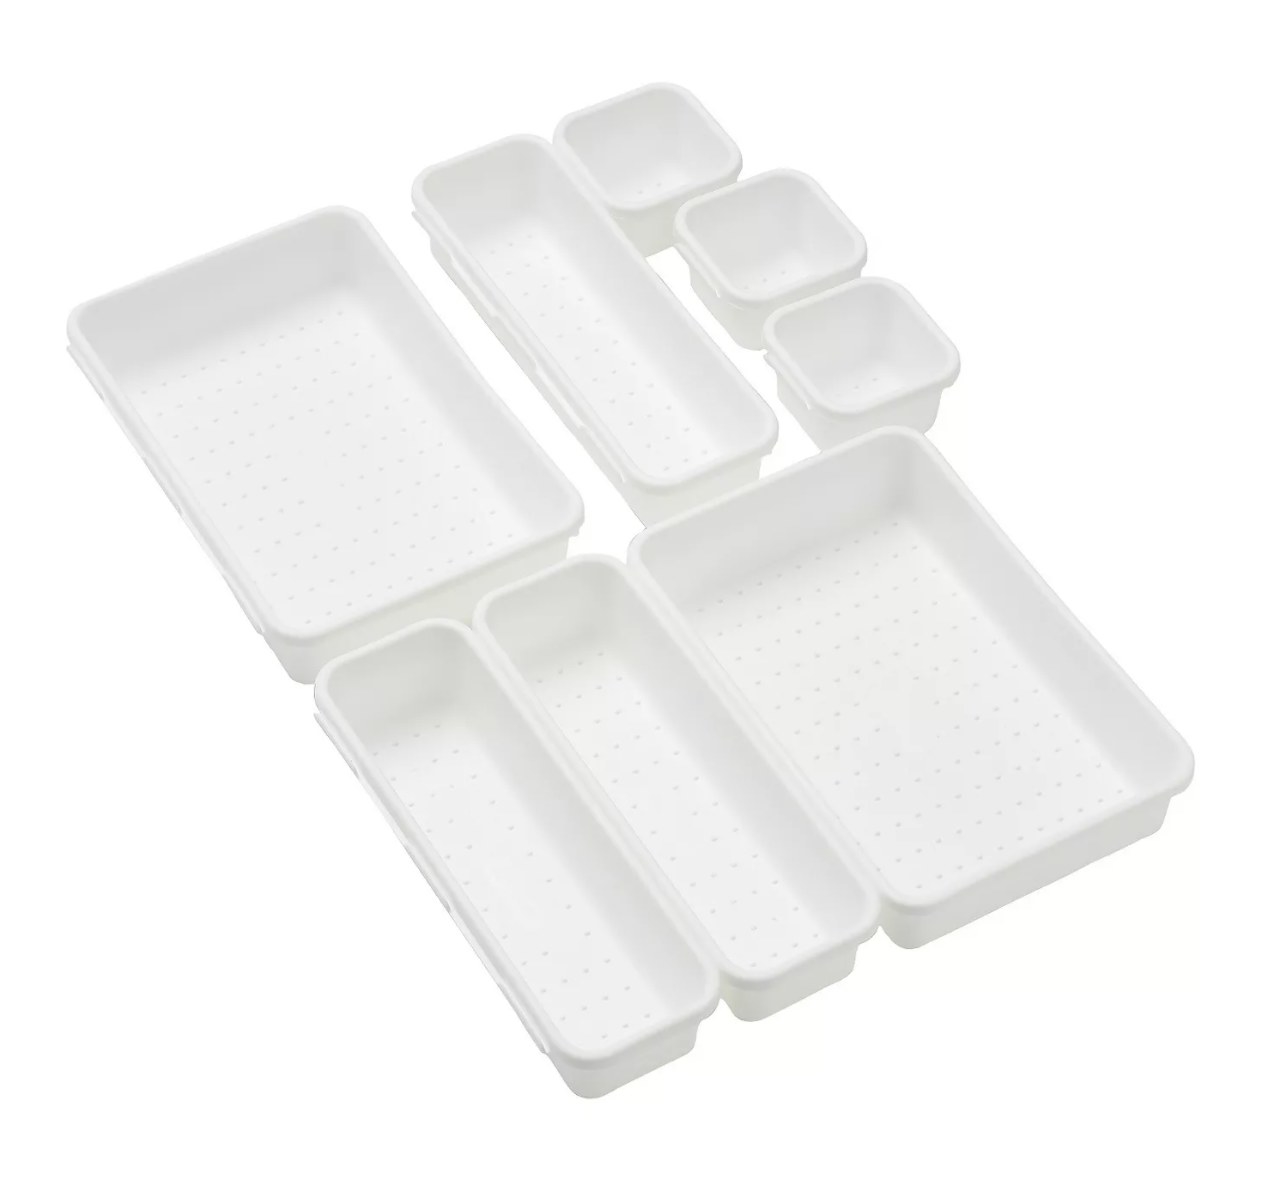 The eight white interlocking bins are all different sizes and have simple dotted lines